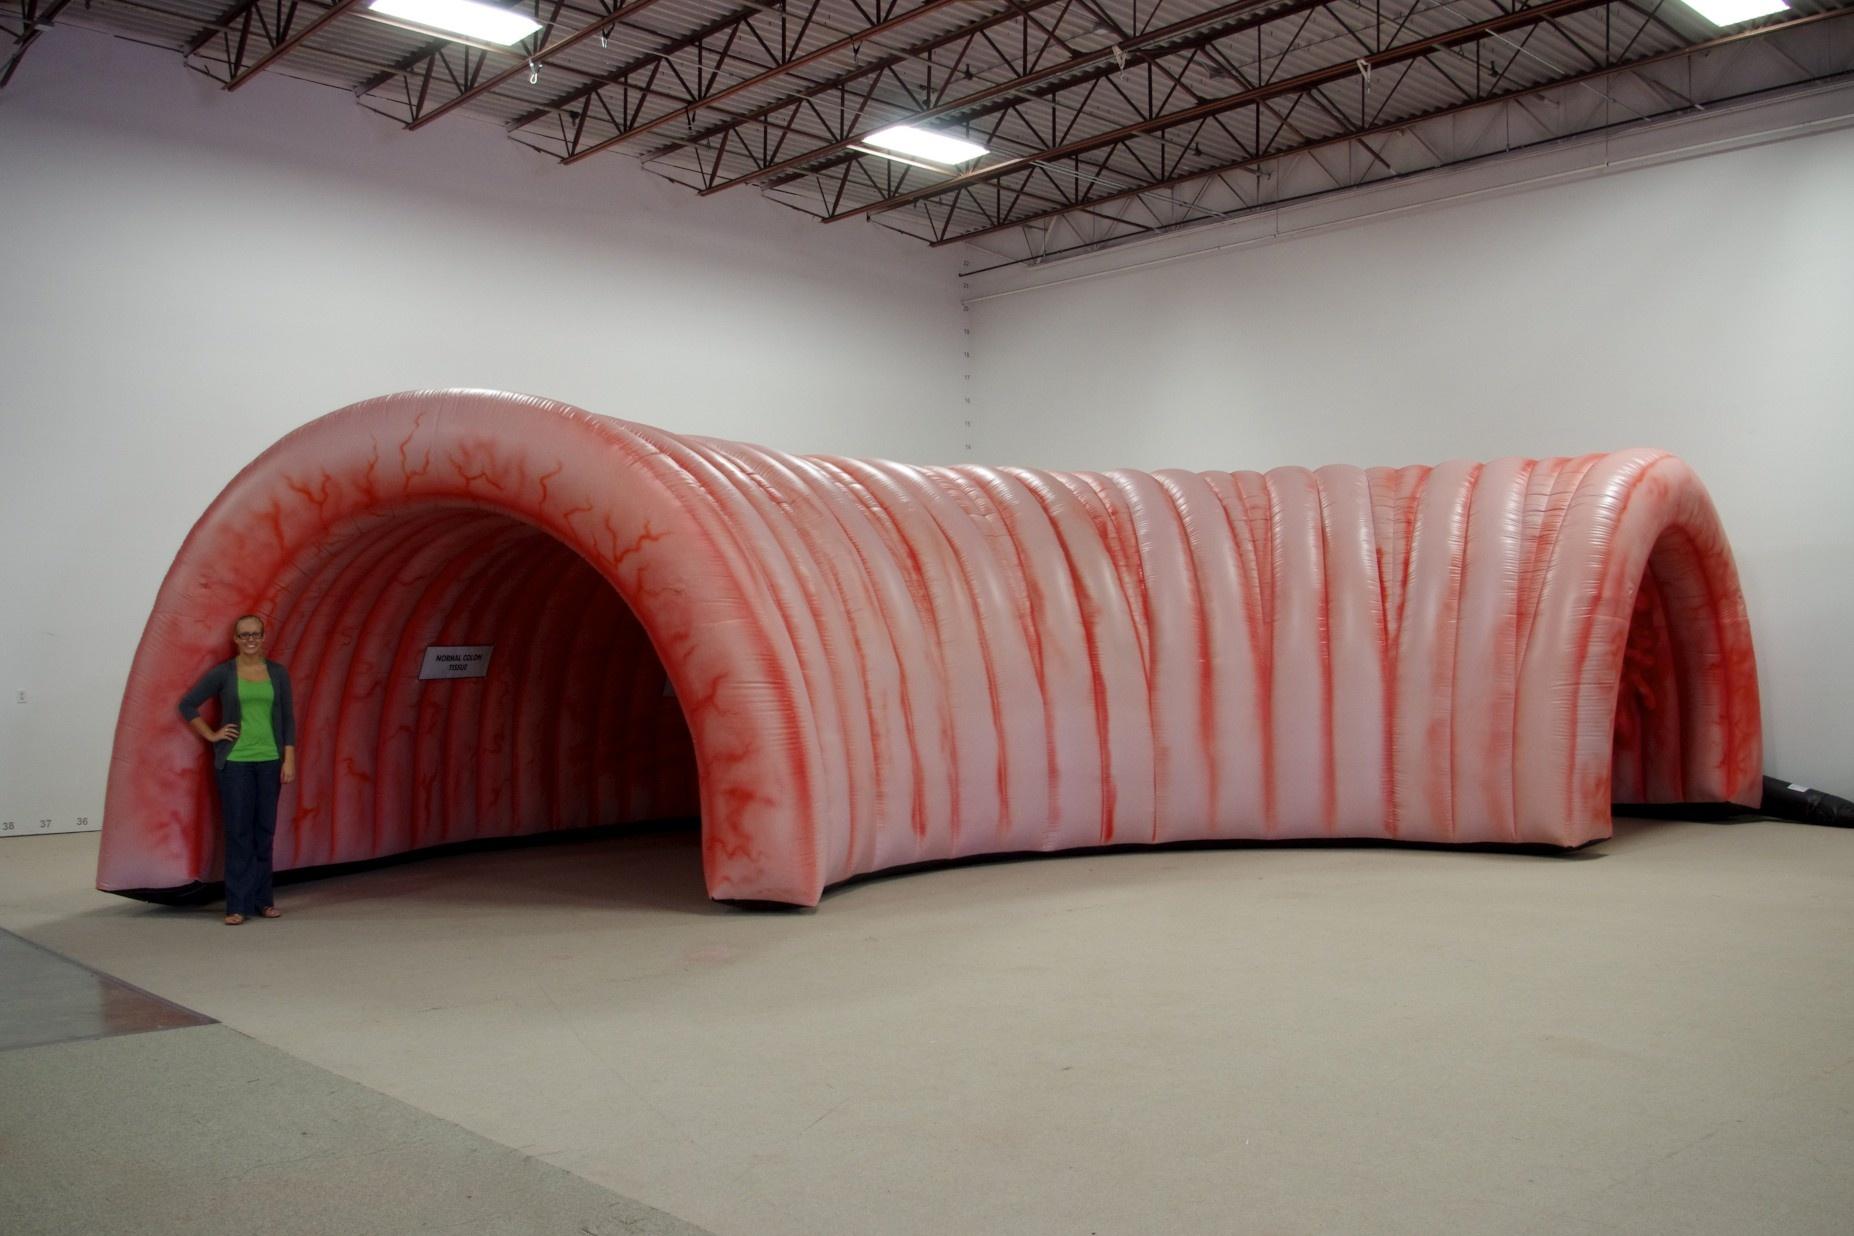 Center for Rural Health's Inflatable Colon